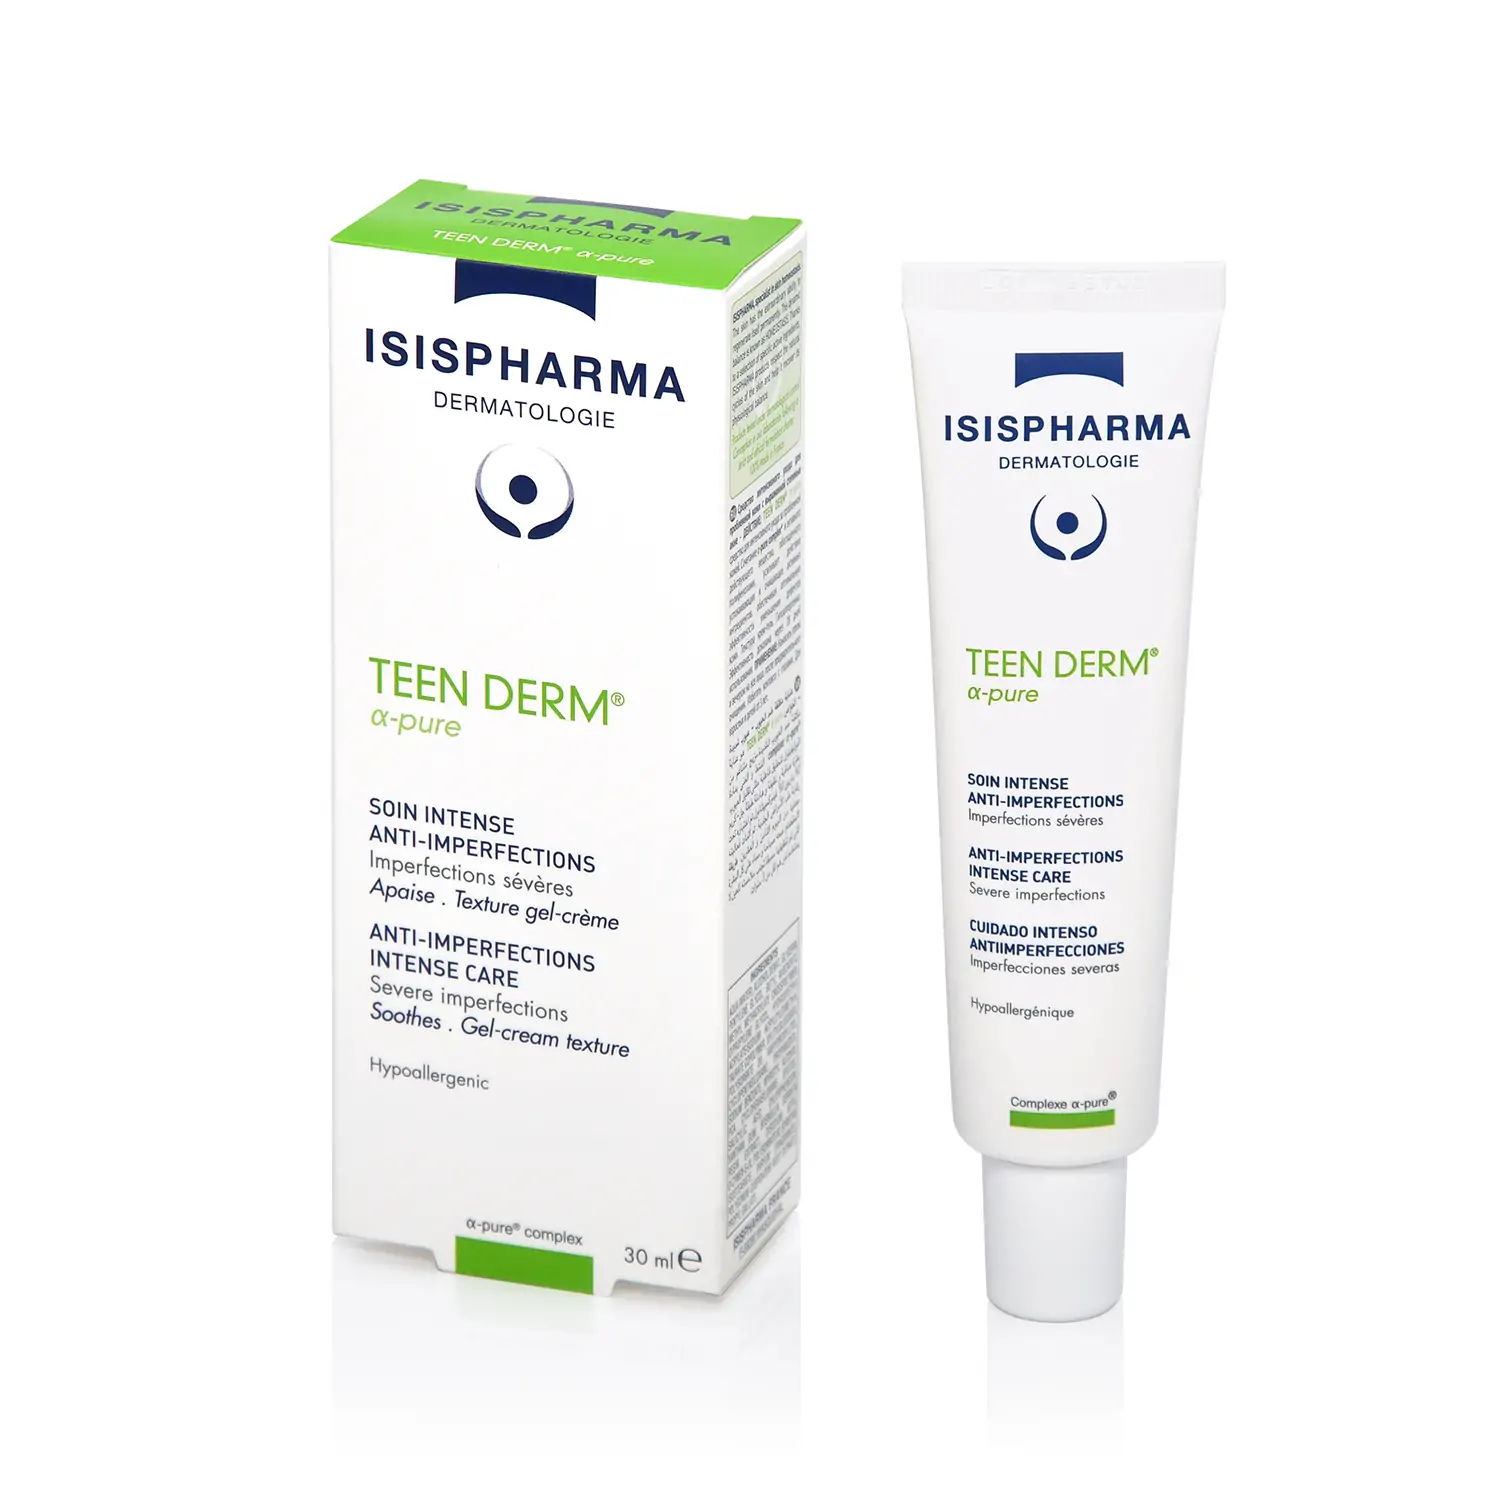 Teen Derm Pure Anti-Imperfection Intense Care